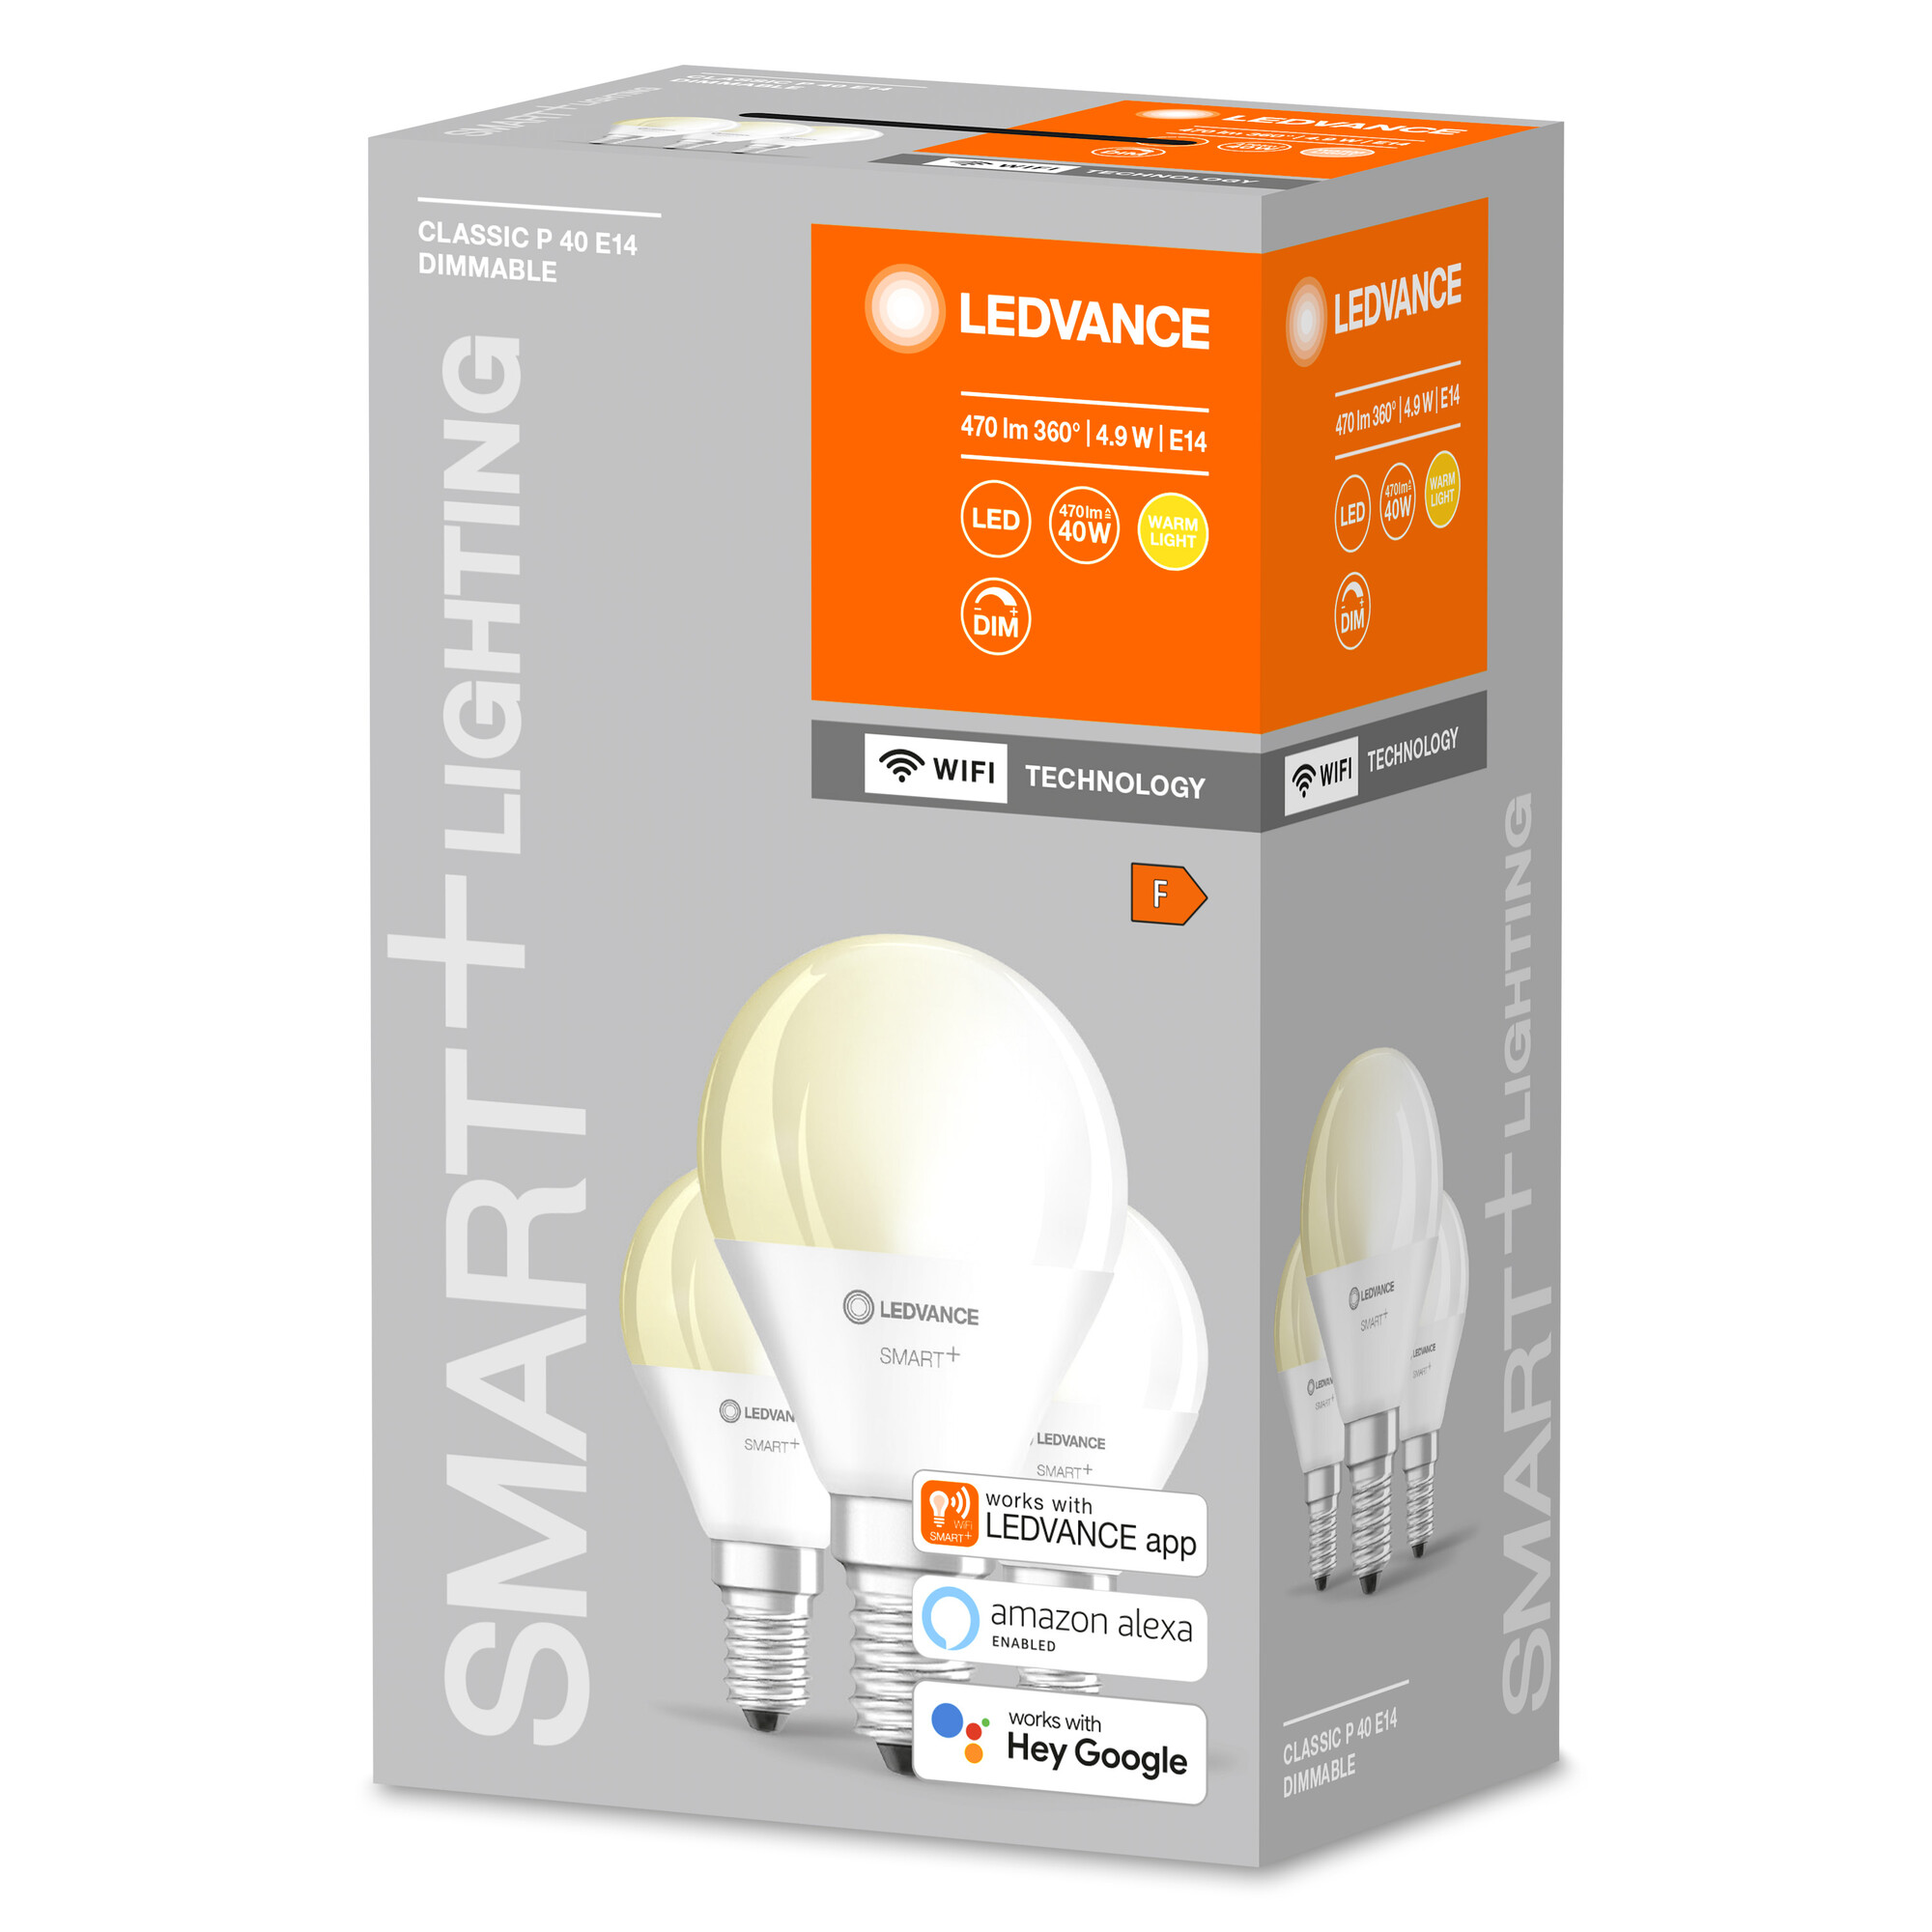 LED-Lampe 'Smart+ WiFi CLP' warmweiß 4,9 W E14 470 lm, dimmbar 3er-Pack + product picture